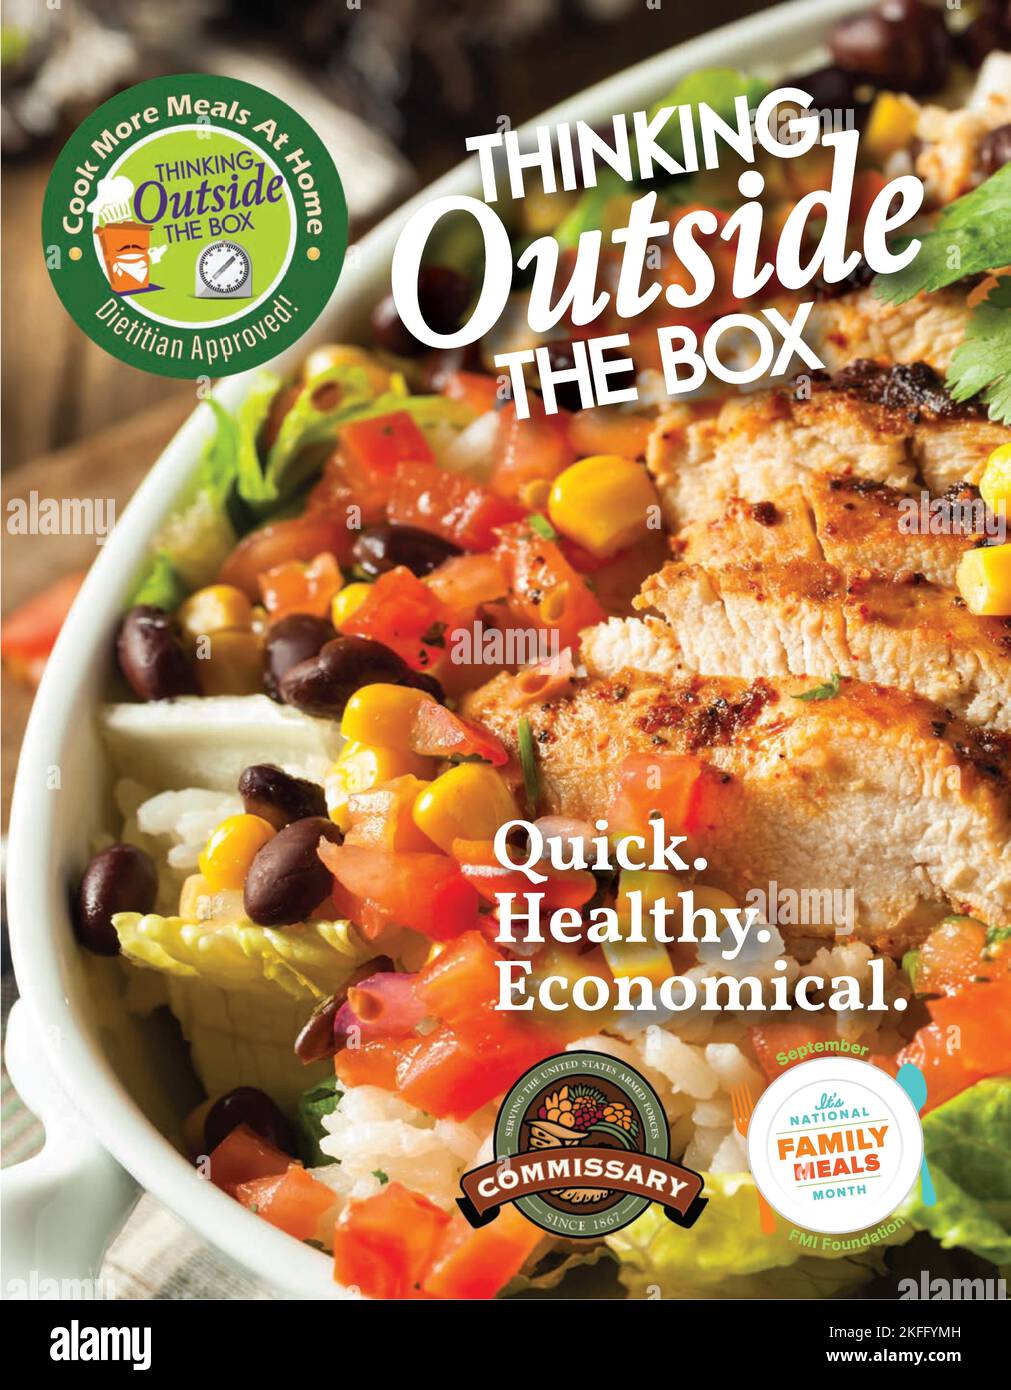 “Thinking Outside the Box” recipes feature a key nutrient and always align with the Dietary Guidelines for Americans so you can be sure they are healthy and economical. Stock Photo